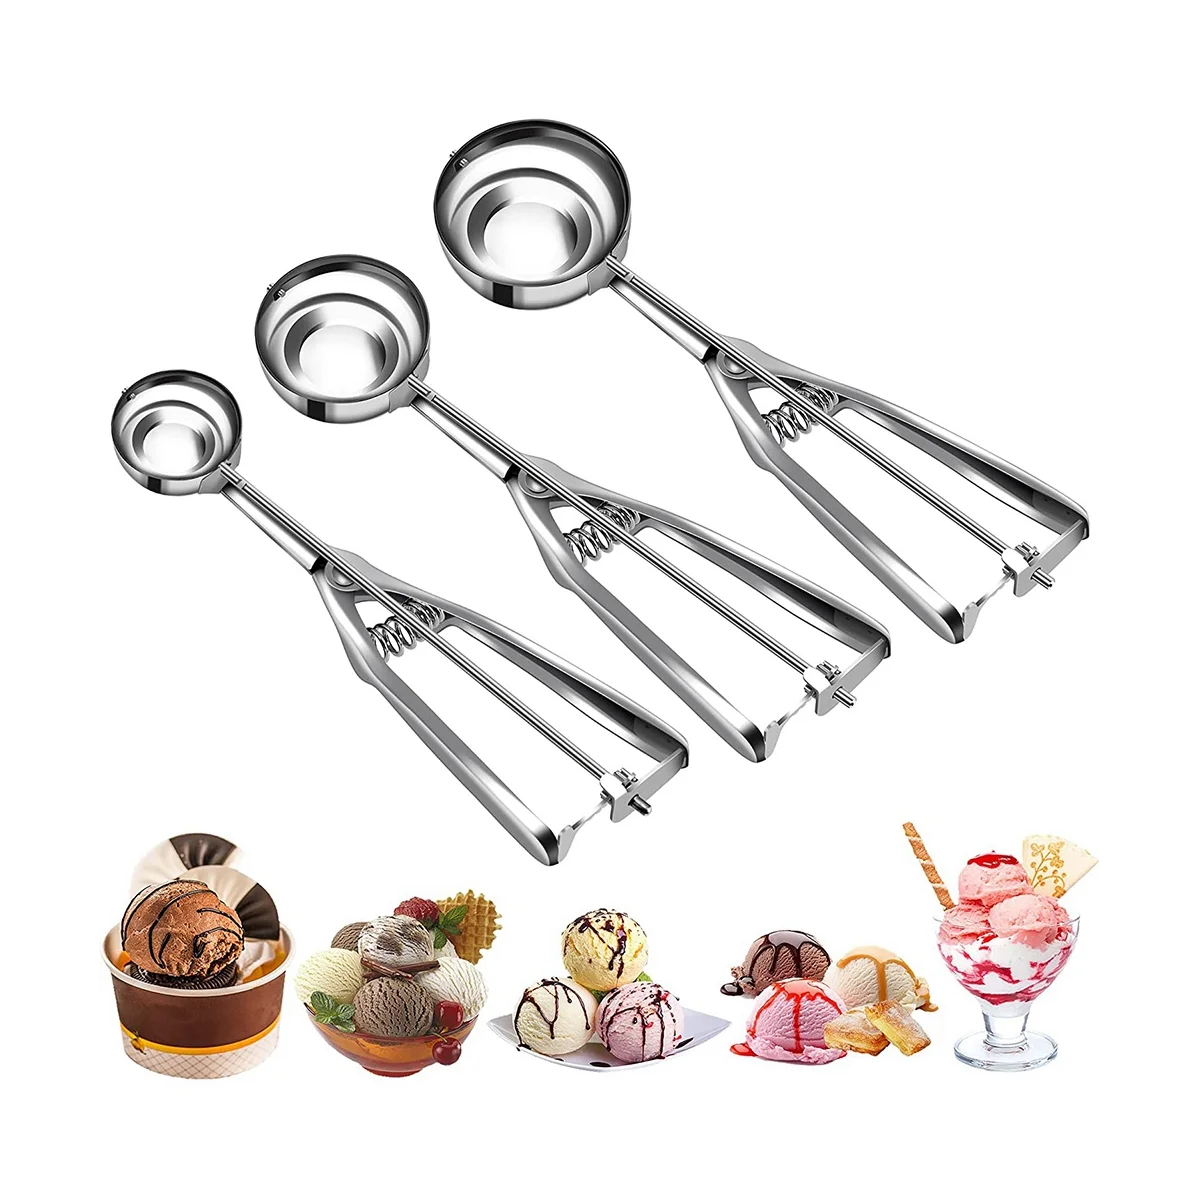 https://ae01.alicdn.com/kf/Sb7efd93a5a794a51ace5f3ecbba5958bc/Ice-Cream-Scoop-Set-with-Multiple-Size-Trigger-Stainless-Steel-Cookie-Scoops-3-for-Baking.jpg